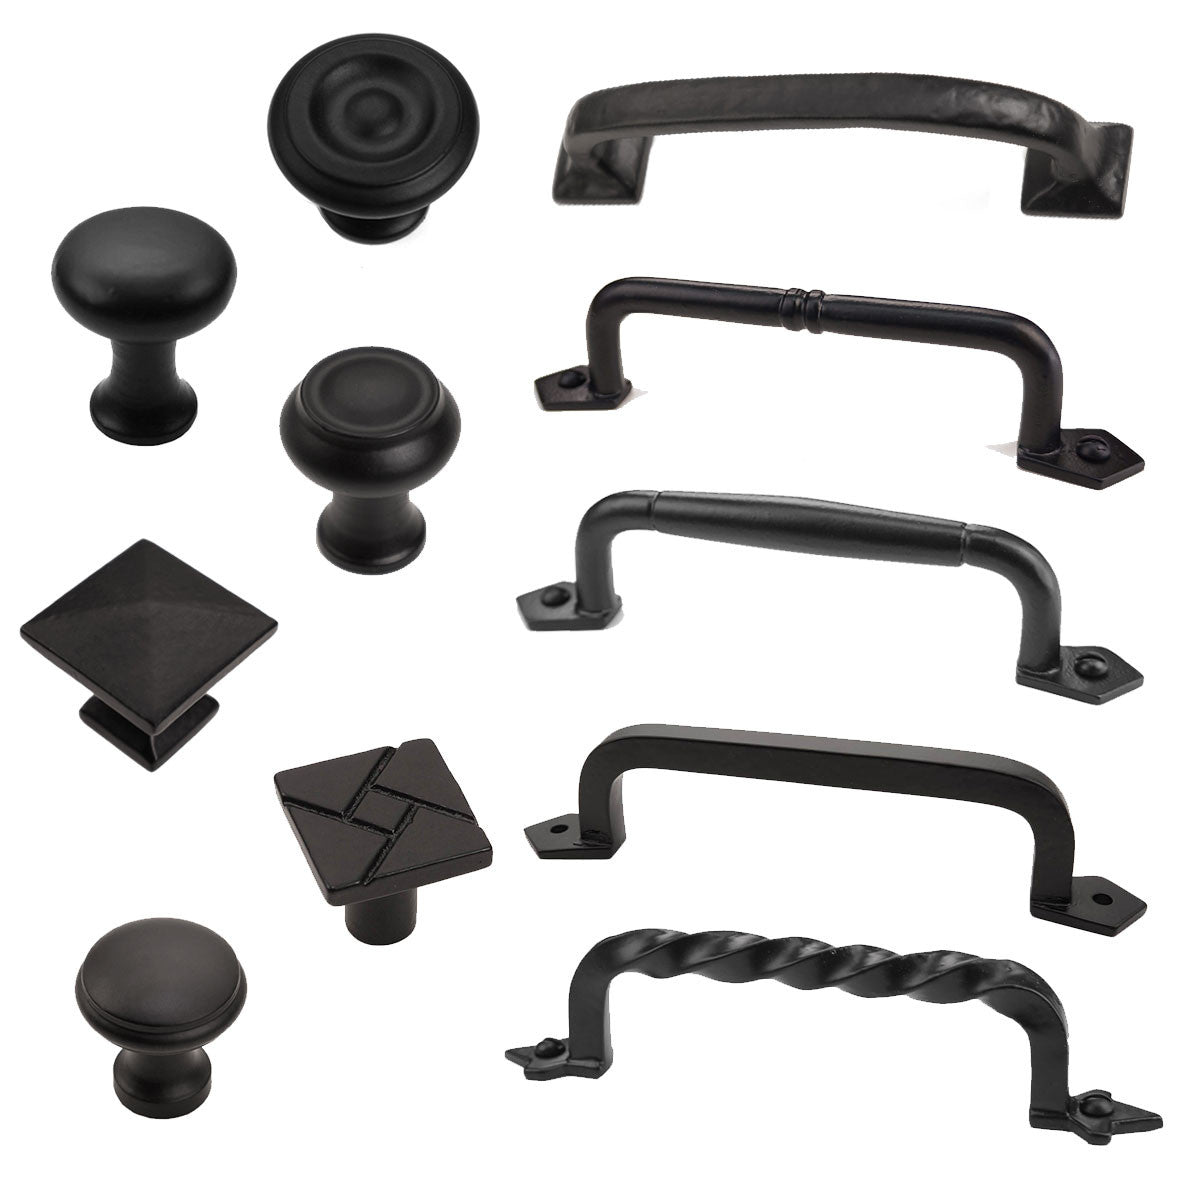 Any Cabinet Pull Or Knob Sample Free Shipping Iron Valley Hardware